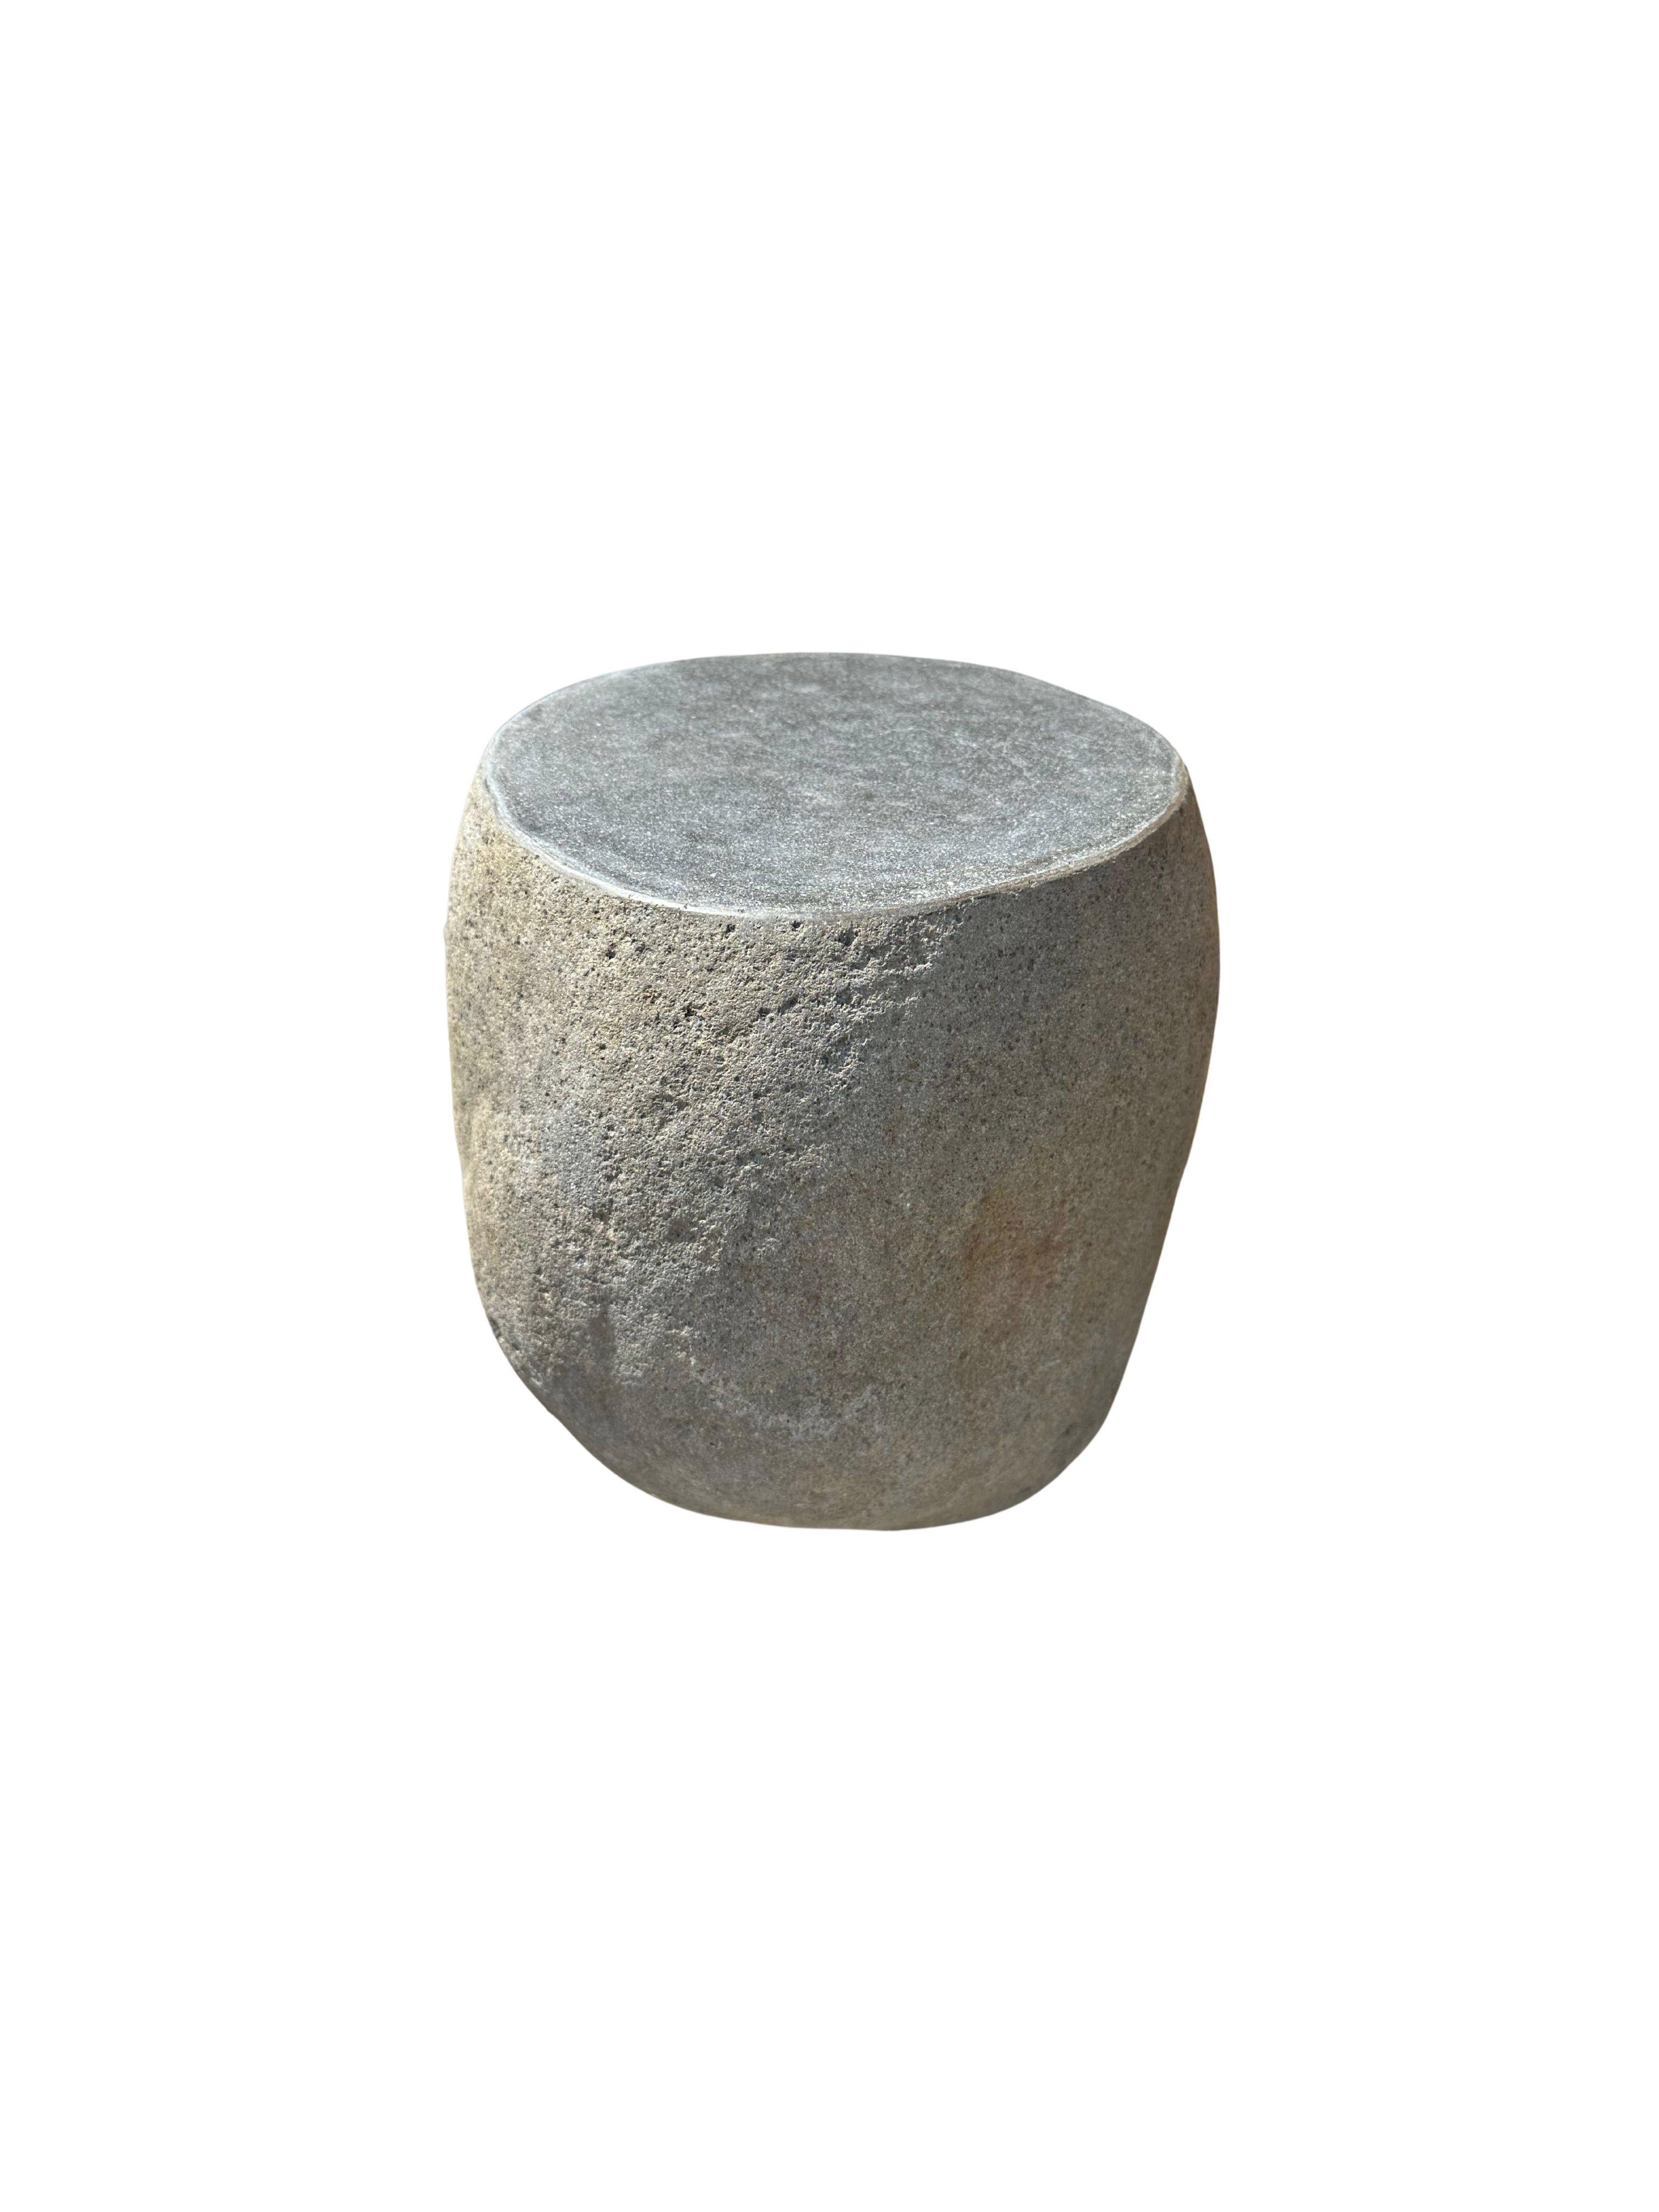 A incredibly heavy and solid rounded stone side table / pedestal. This lovely sculptural object was crafted from a solid stone sourced from a river bed in East Java. A raw and organic object with beautiful textures. Its top side was carved, sanded